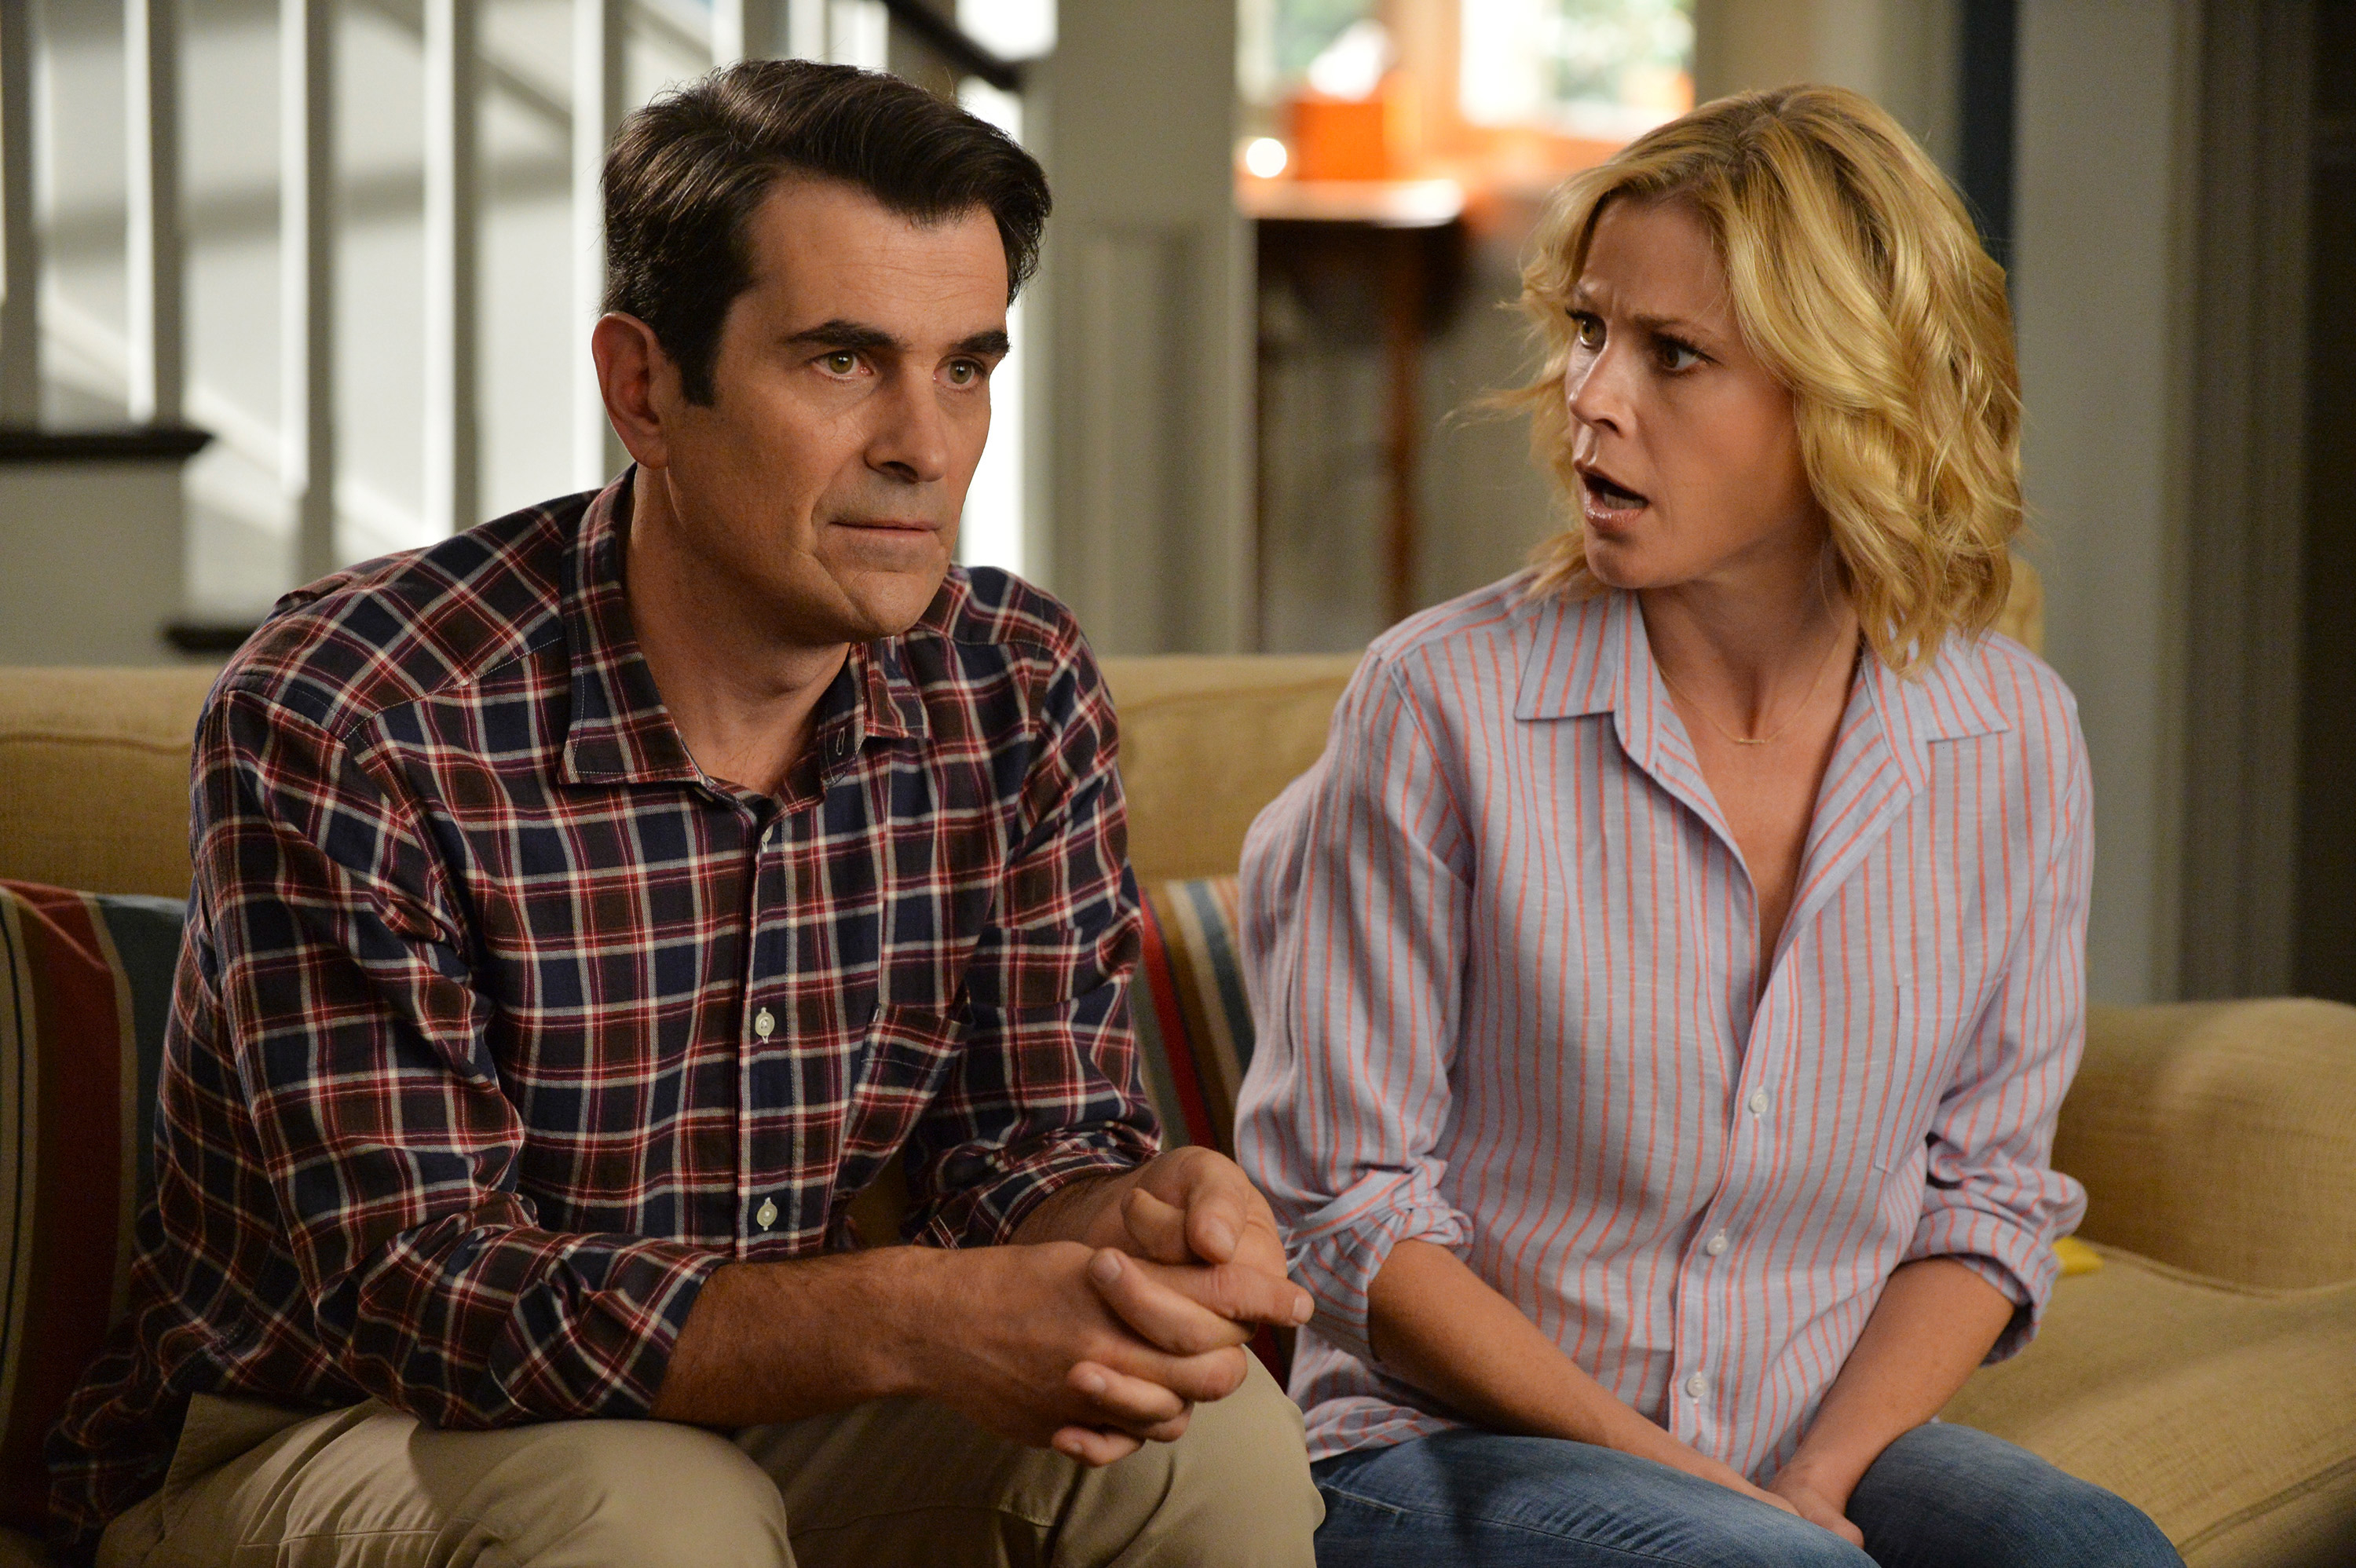 Ty Burrell and Julie Bowen, as Phil and Claire Dunphy, sit on a couch looking surprised in a scene from the TV show &#x27;Modern Family&#x27;